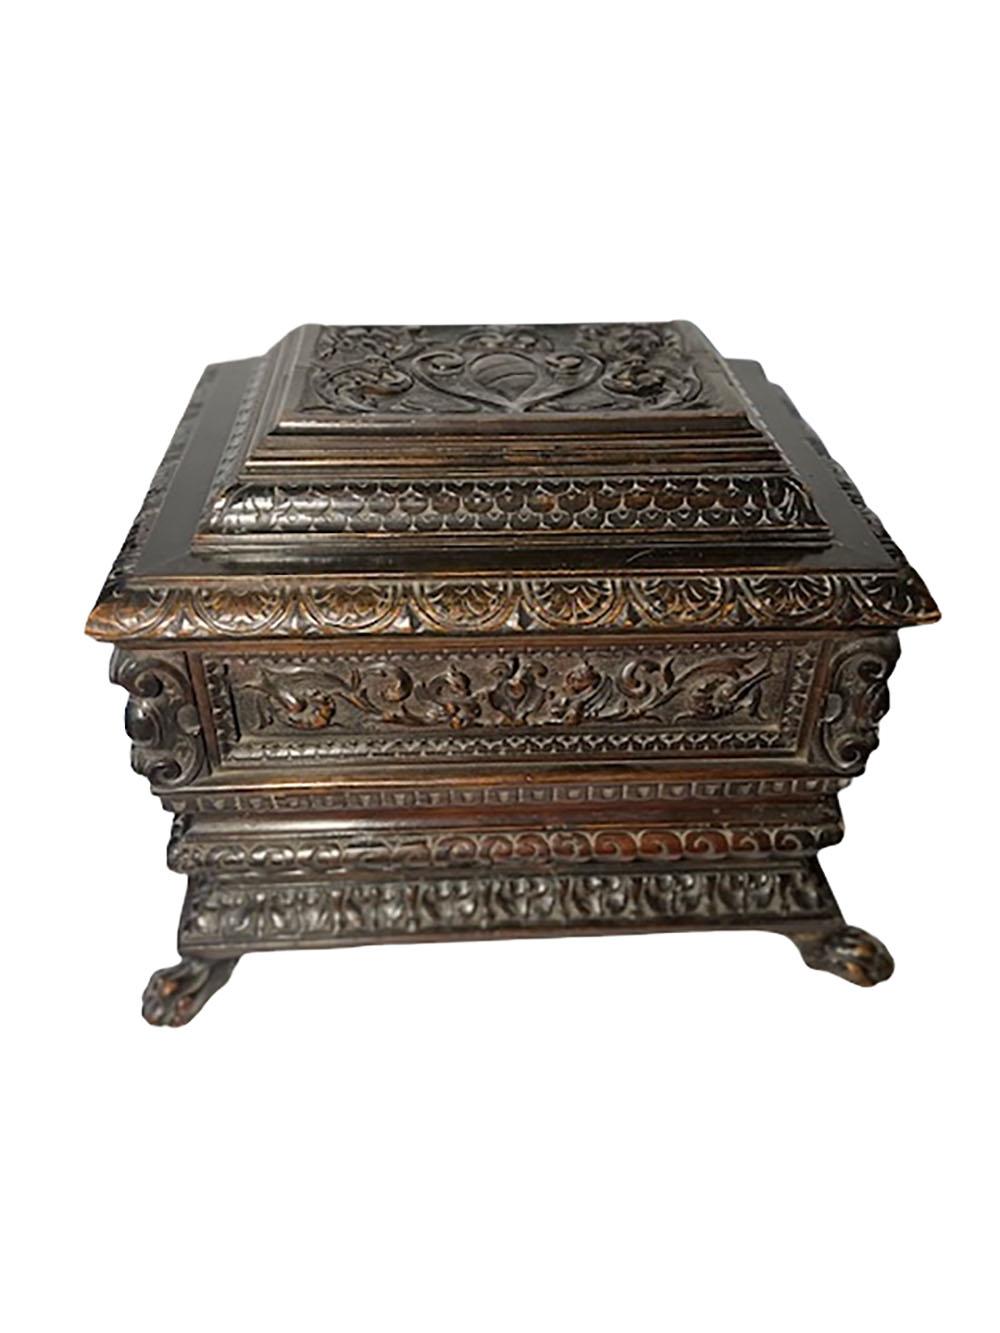 Antique turn of the century carved Italian mahogany casket in the style of a tomb with scrolls, acanthus leaves, bellflowers and a punch work background with winged griffons on the sides. The corners include an oval shield with scrolls at the top